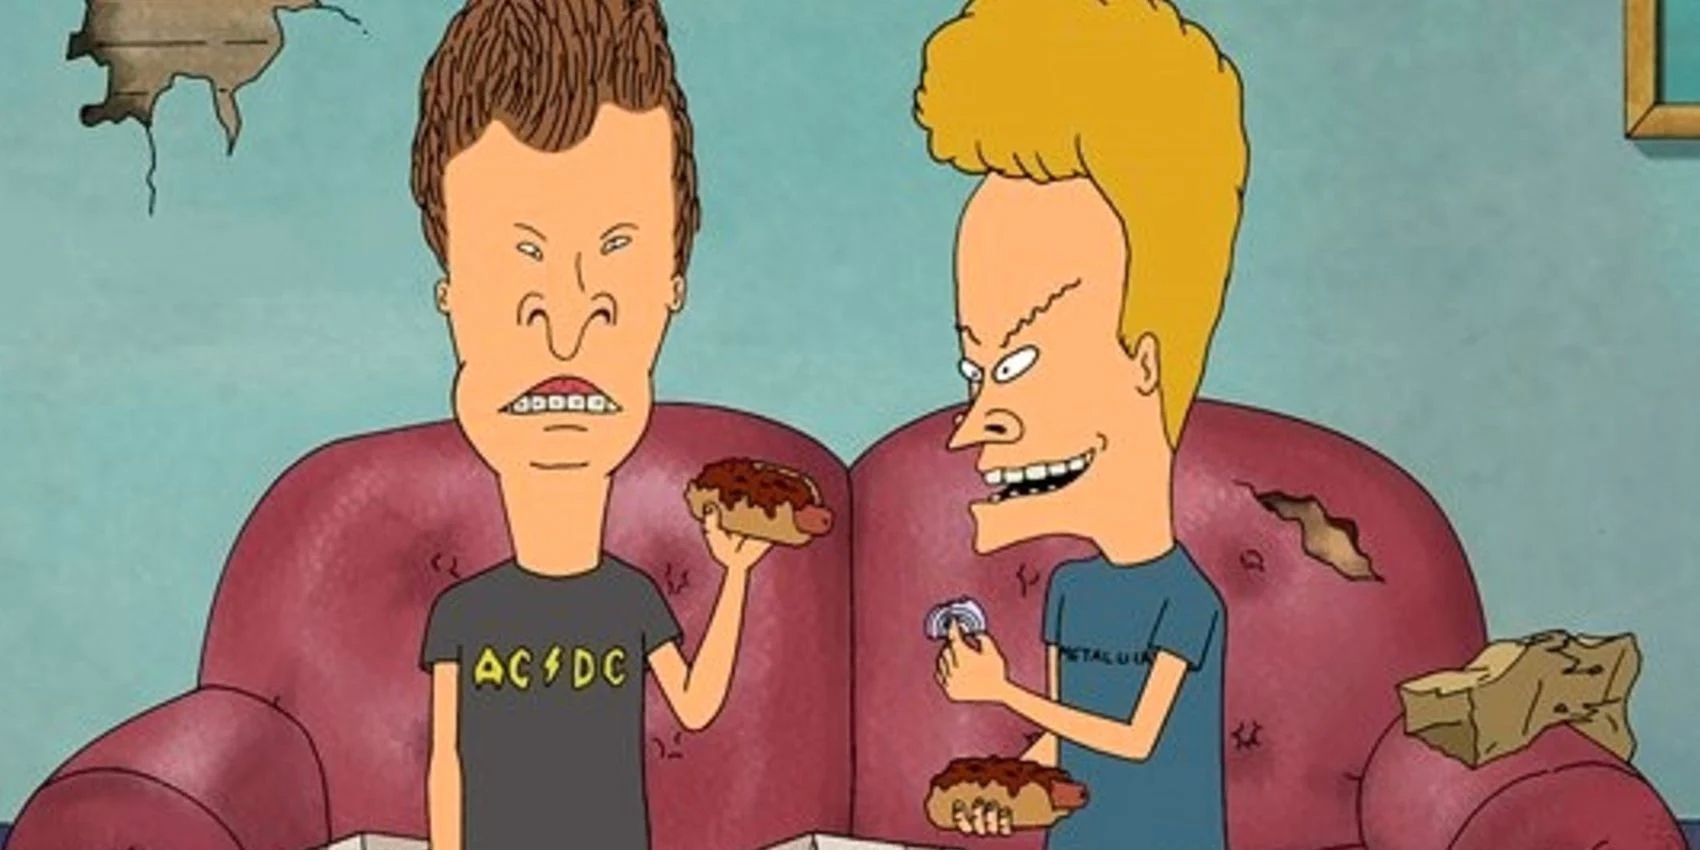 Beavis and Butthead from the adult cartoon series of the same name.